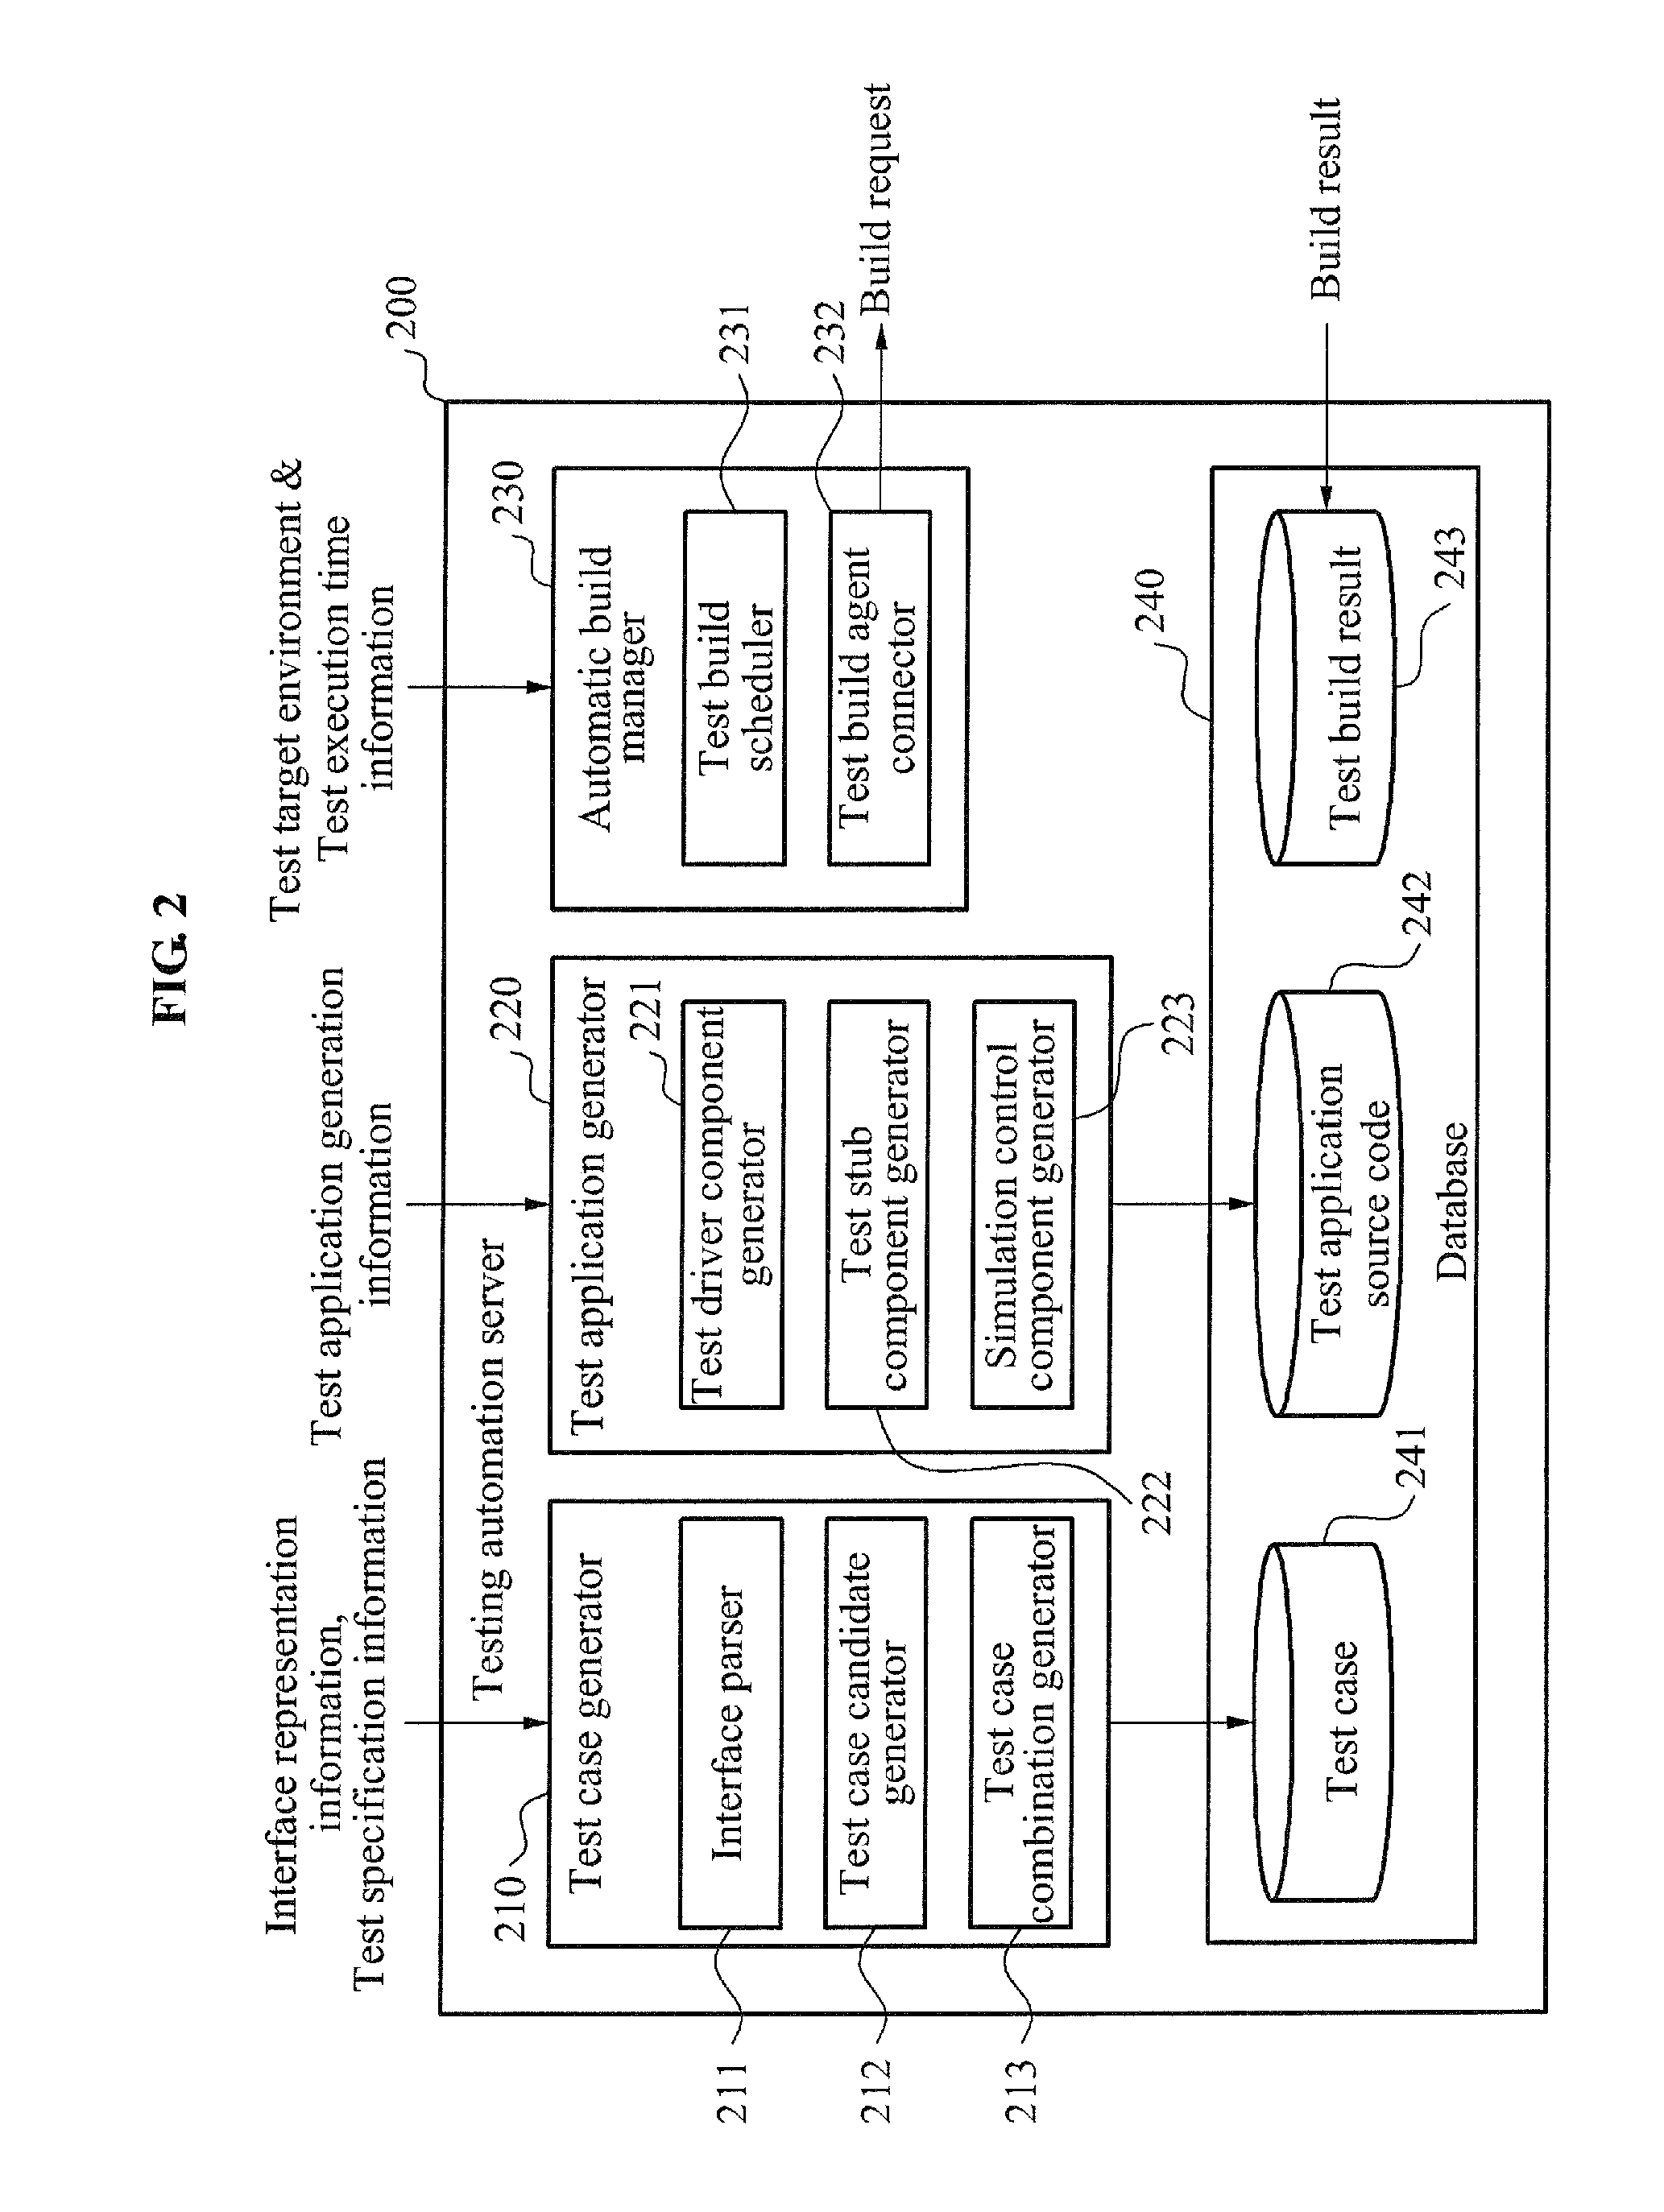 Simulation-based interface testing automation system and method for robot software components